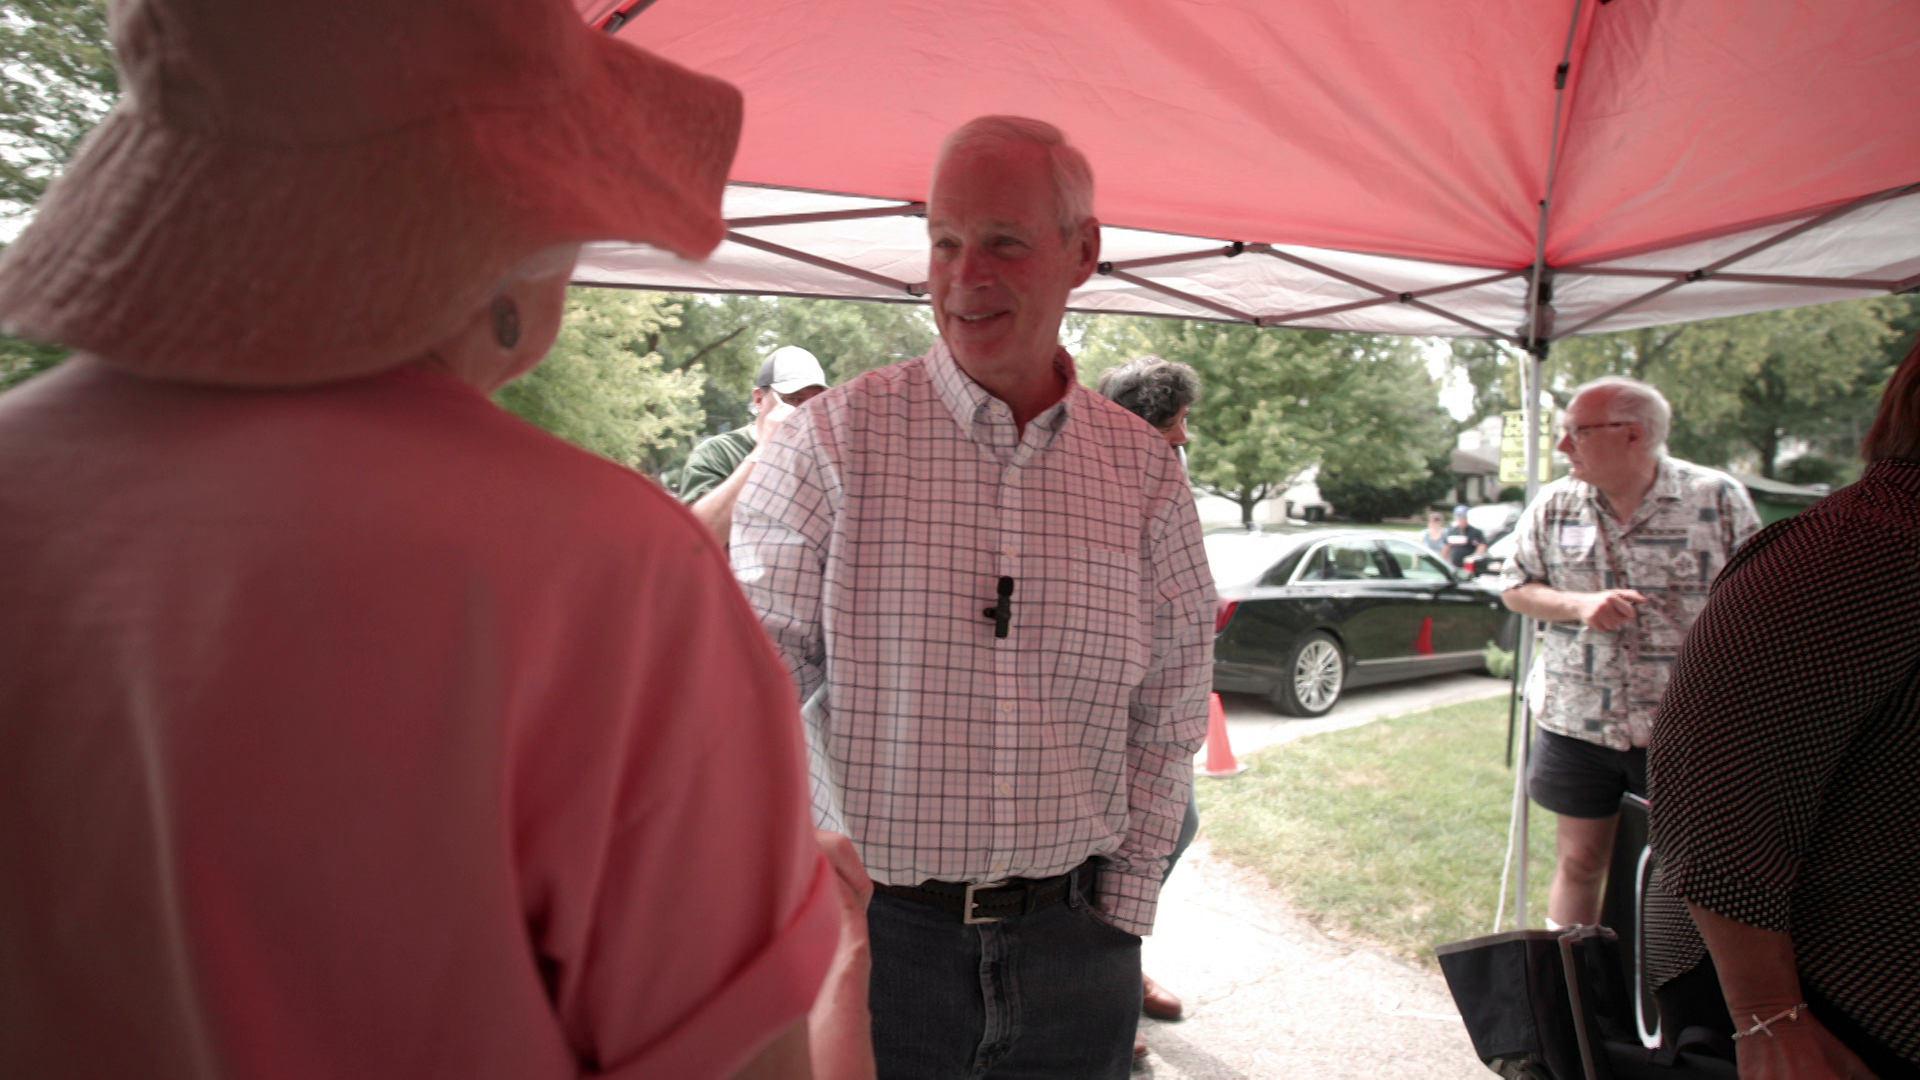 Ron Johnson stands outside and speaks with other people while standing under a canopy tent, with a parked car and trees in the background.